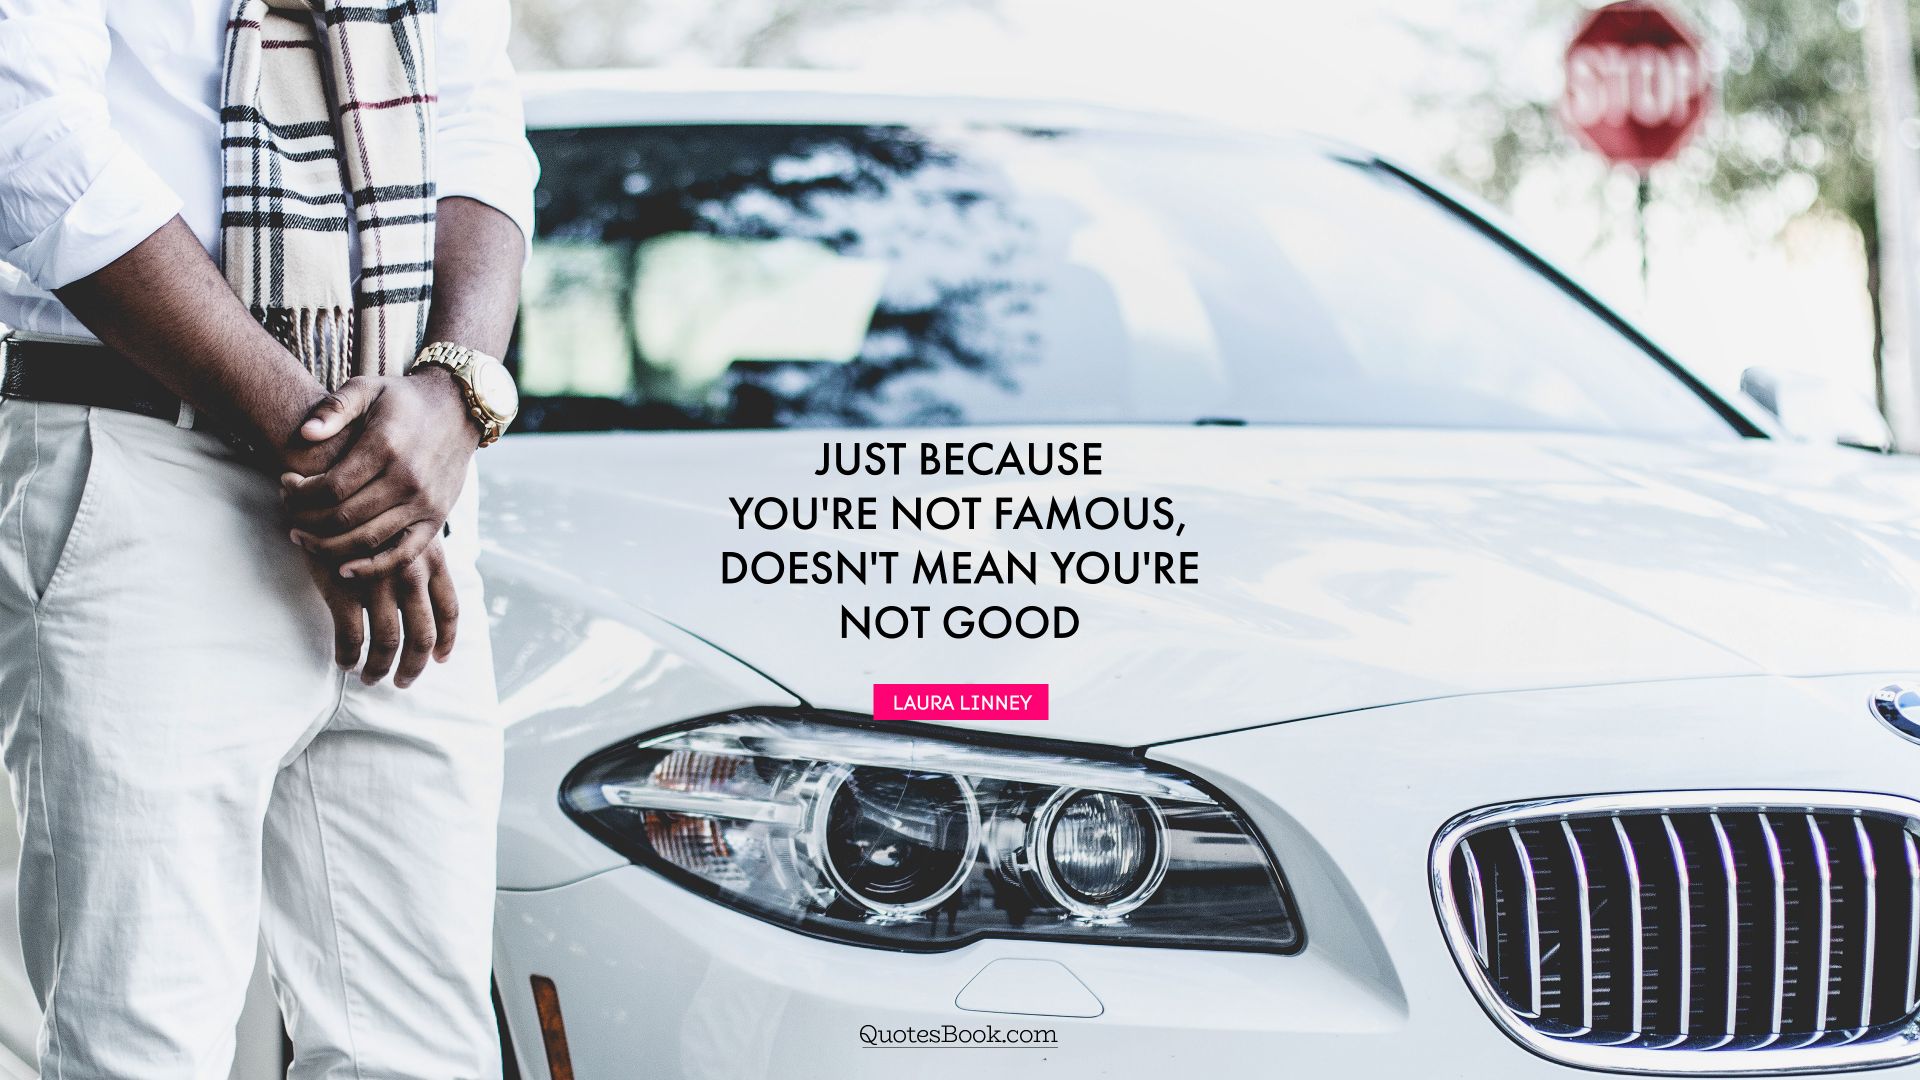 Just because you're not famous, doesn't mean you're not good. - Quote by Laura Linney